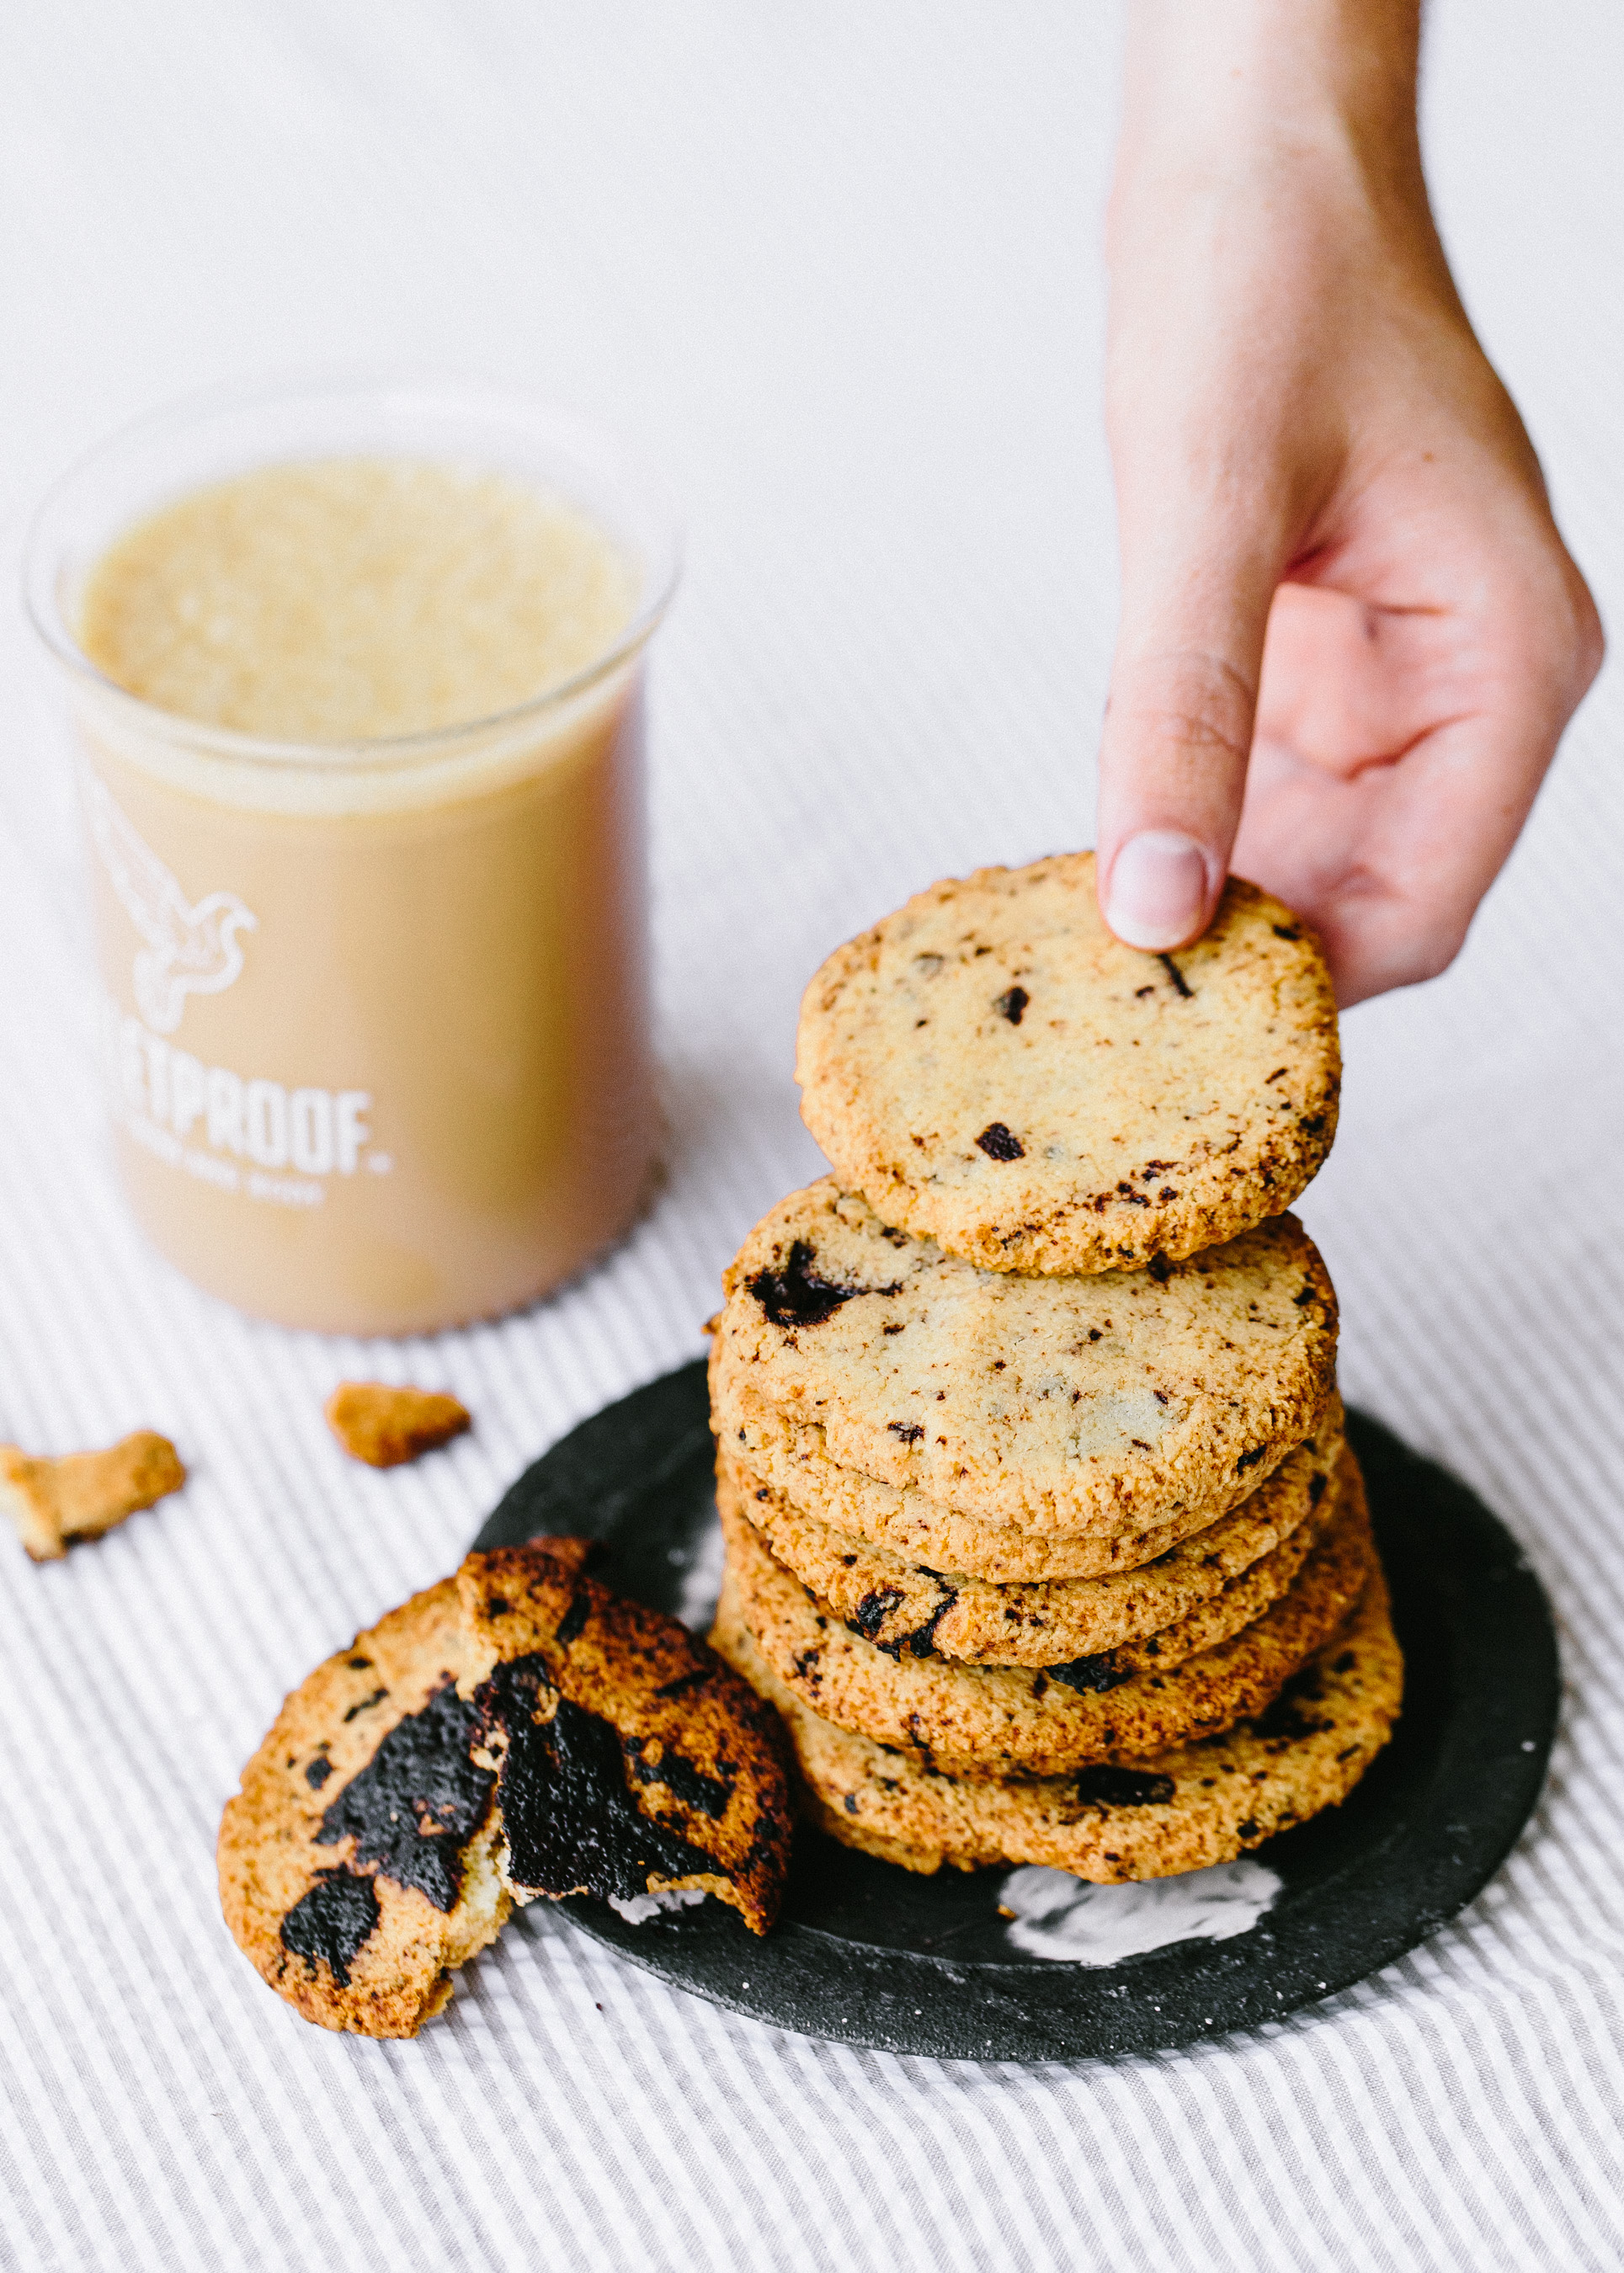 Keto Protein Chocolate Chip Cookies Recipe